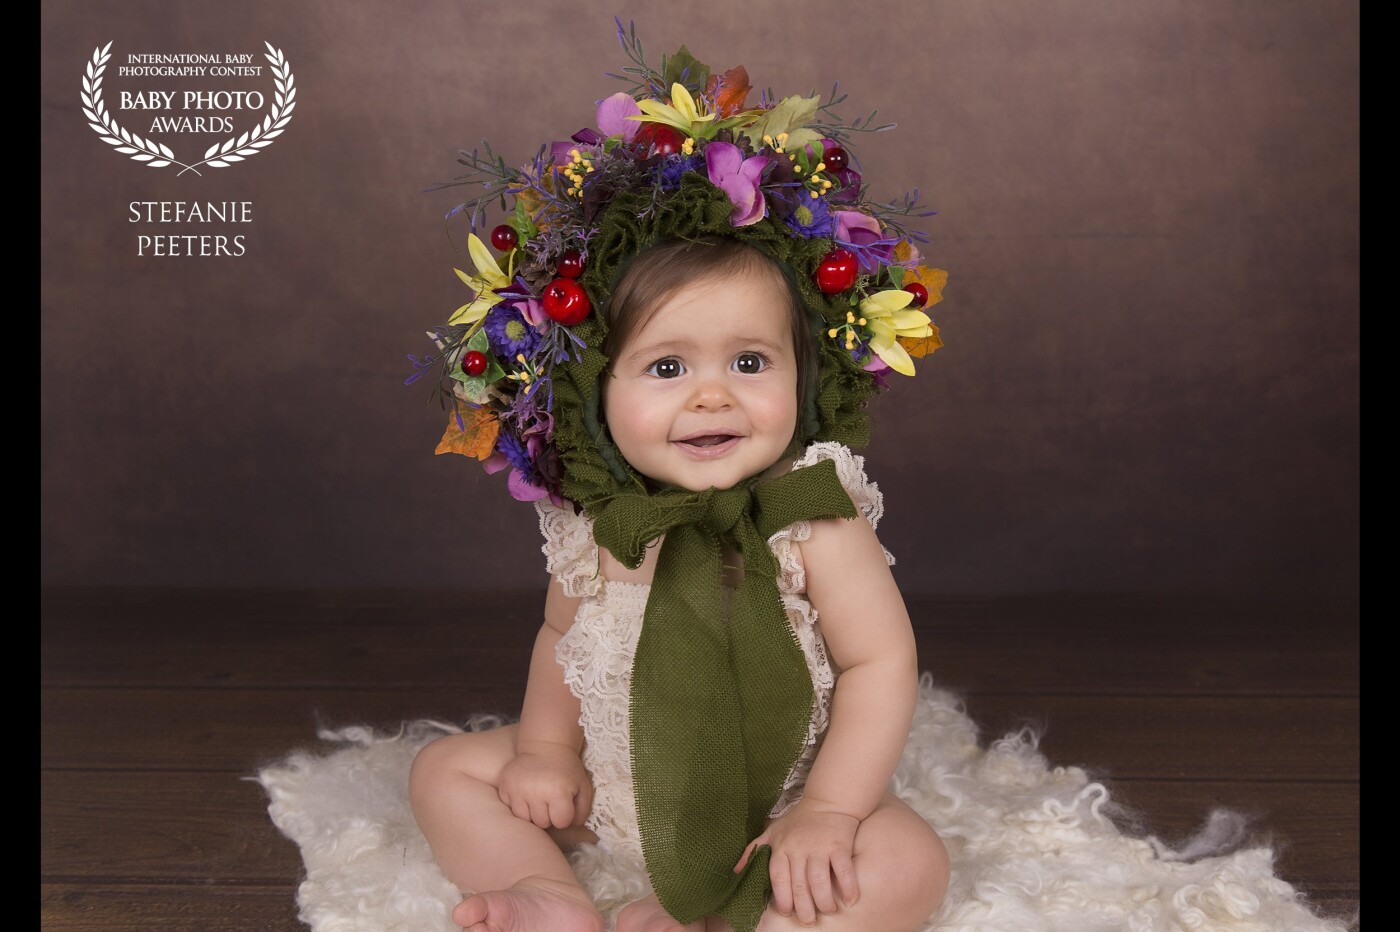 This is Sia, our sweet little girl of 7 months. When she was born, i want to capture every moment! So, she was our first model for the sitter session. I love the results... The beautiful colors from the flower bonnet looks great on her!